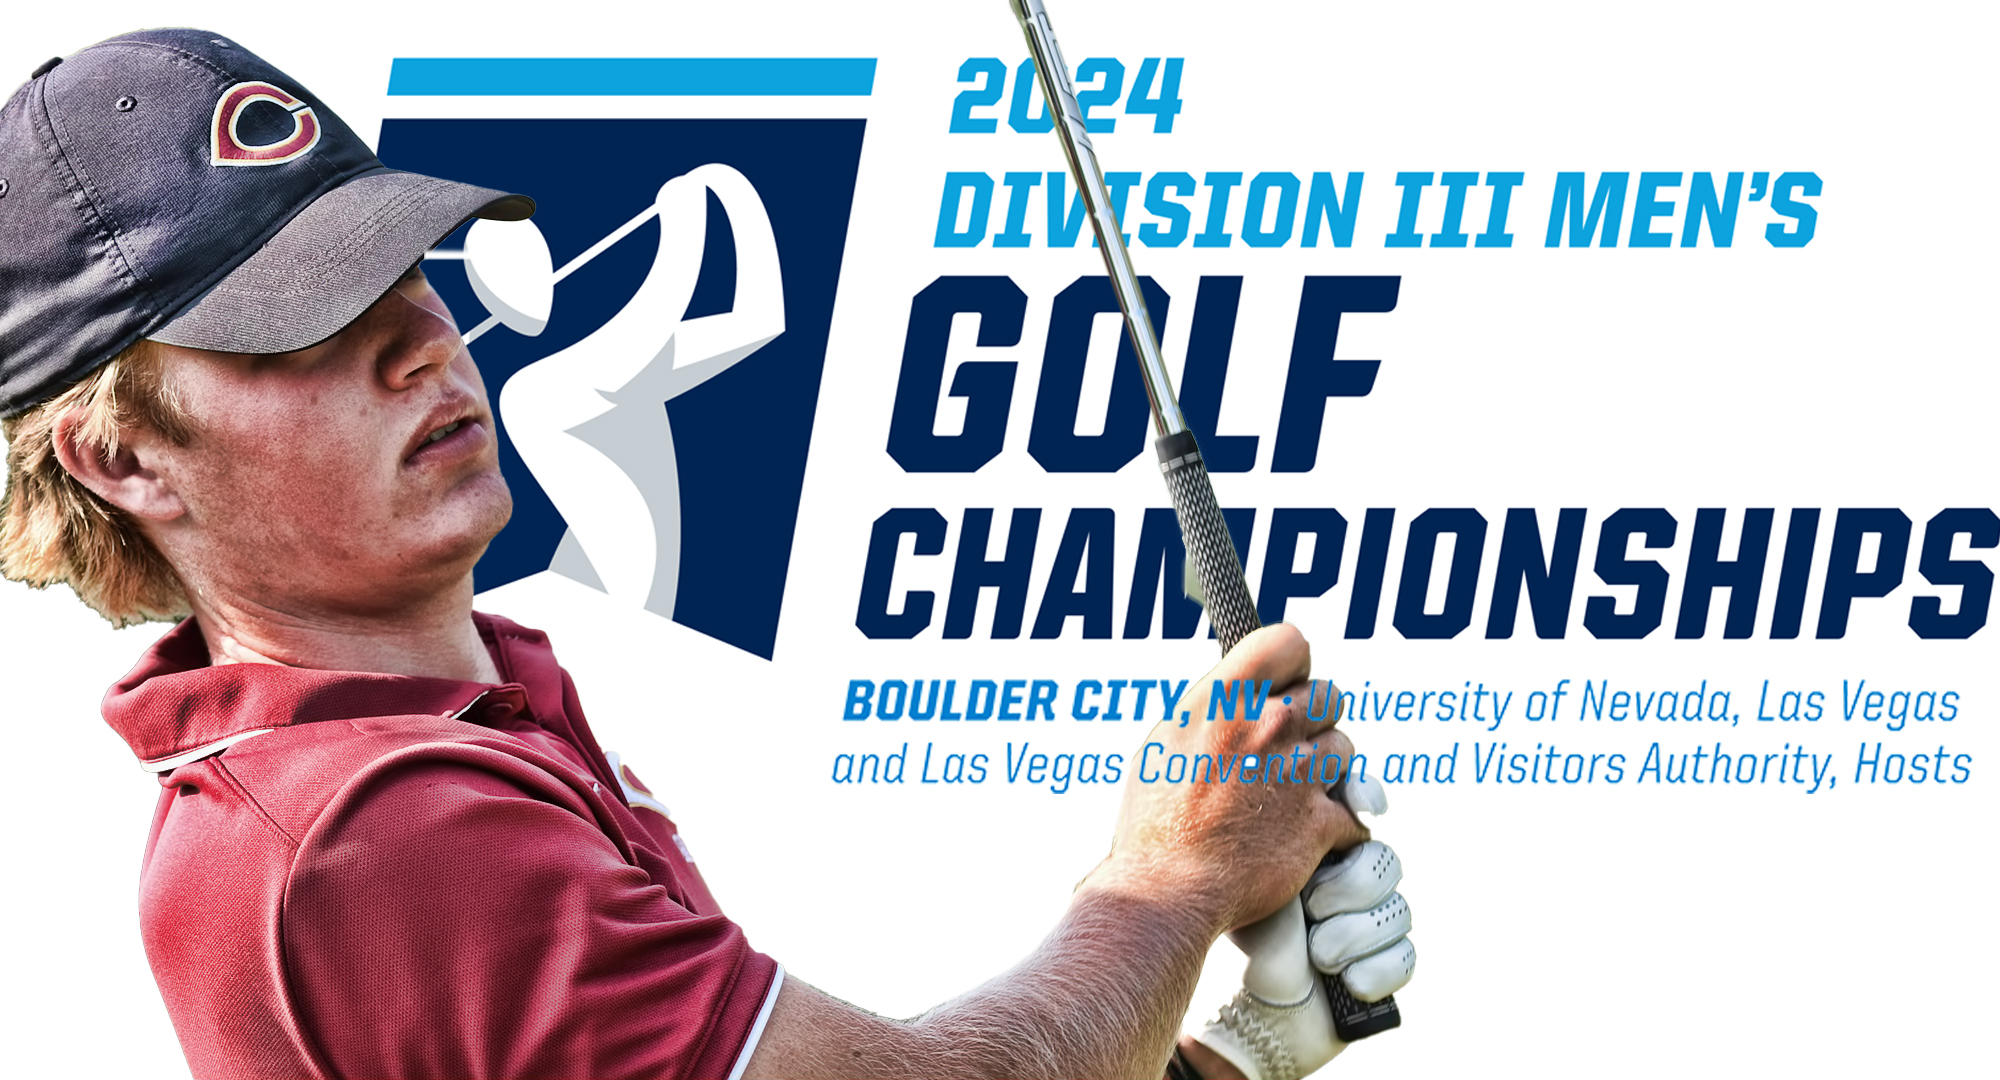 Gabe Benson earned one of the six individual at-large berths to play in the Division III NCAA Championship Meet on May 14-17 in Nevada.